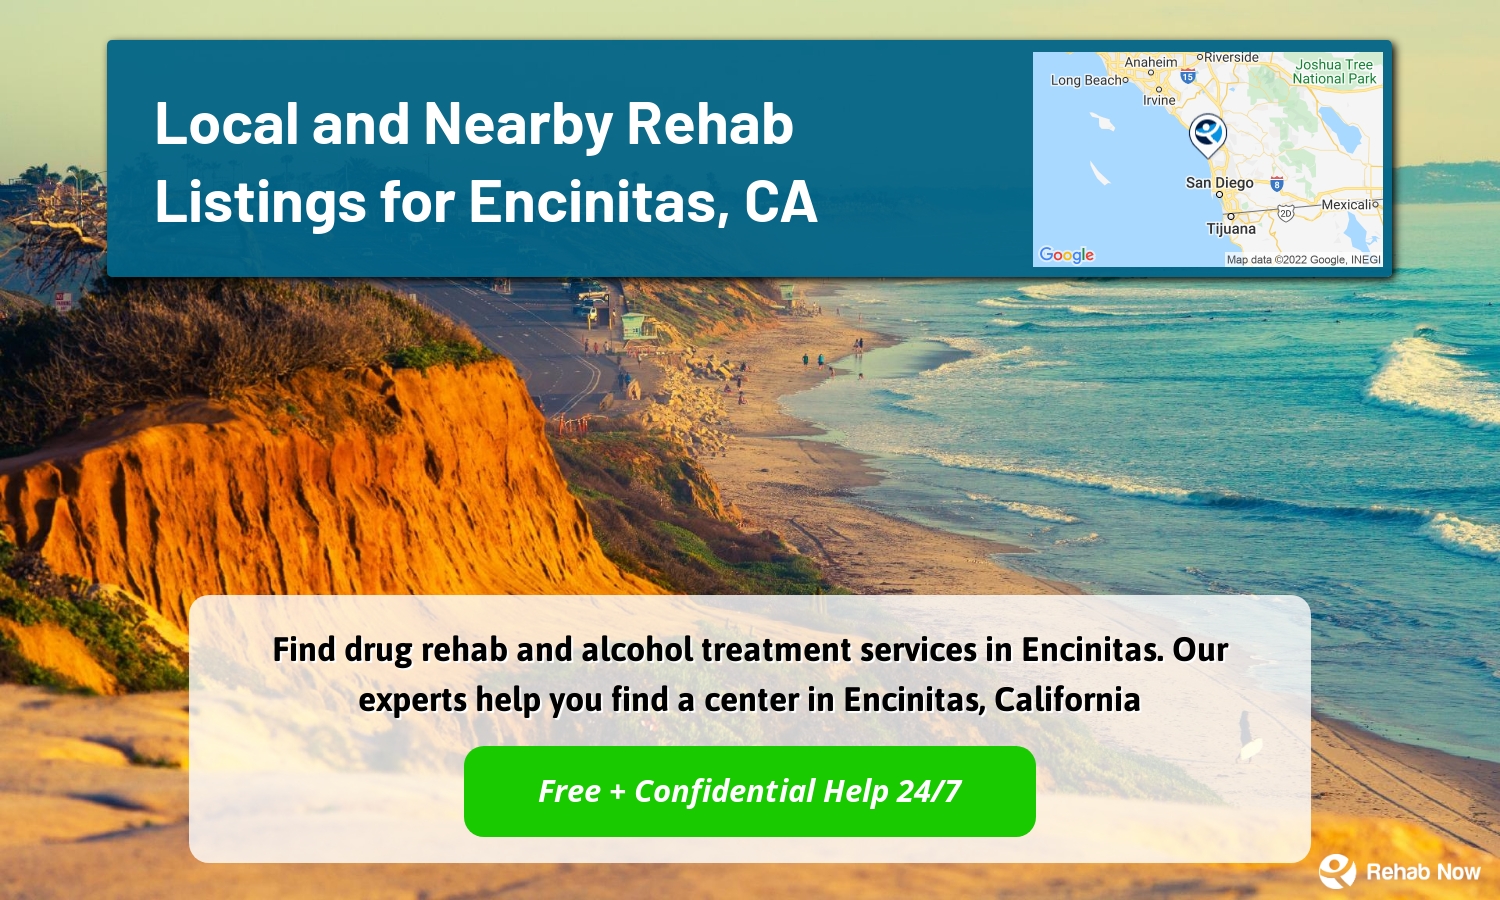 Find drug rehab and alcohol treatment services in Encinitas. Our experts help you find a center in Encinitas, California